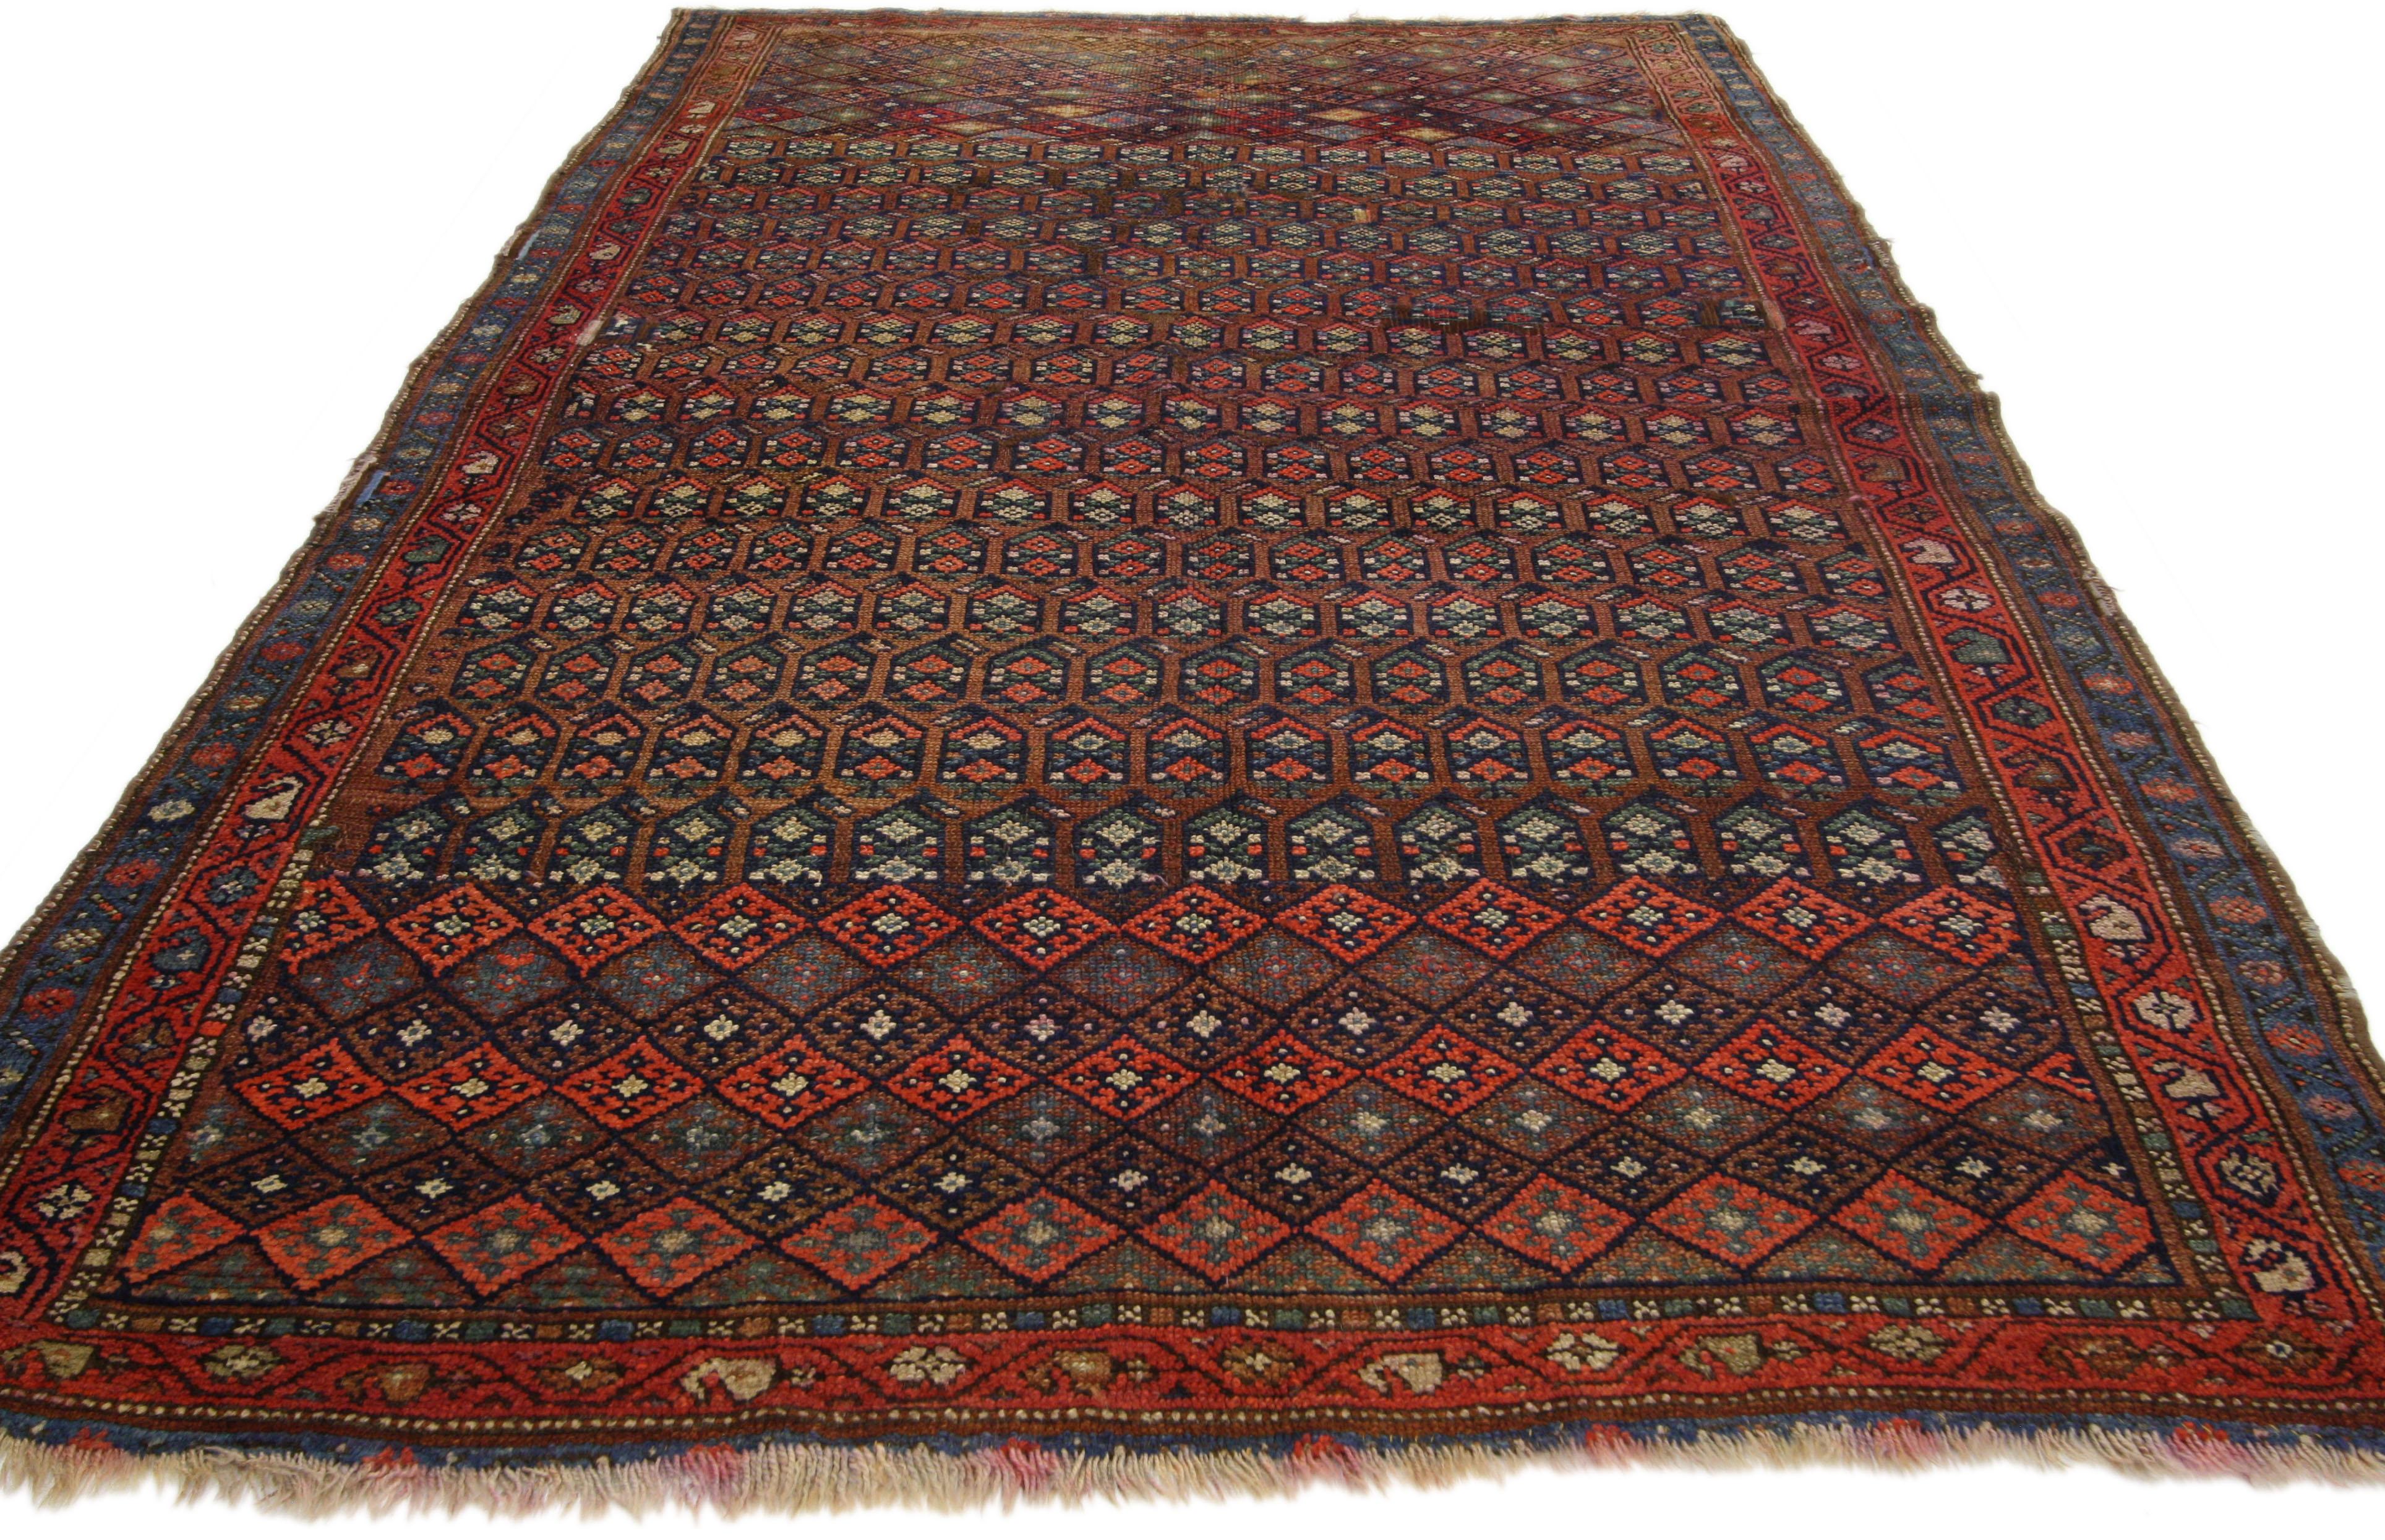 Rustic Distressed Antique Persian Kurd Rug with Adirondack Lodge Style For Sale